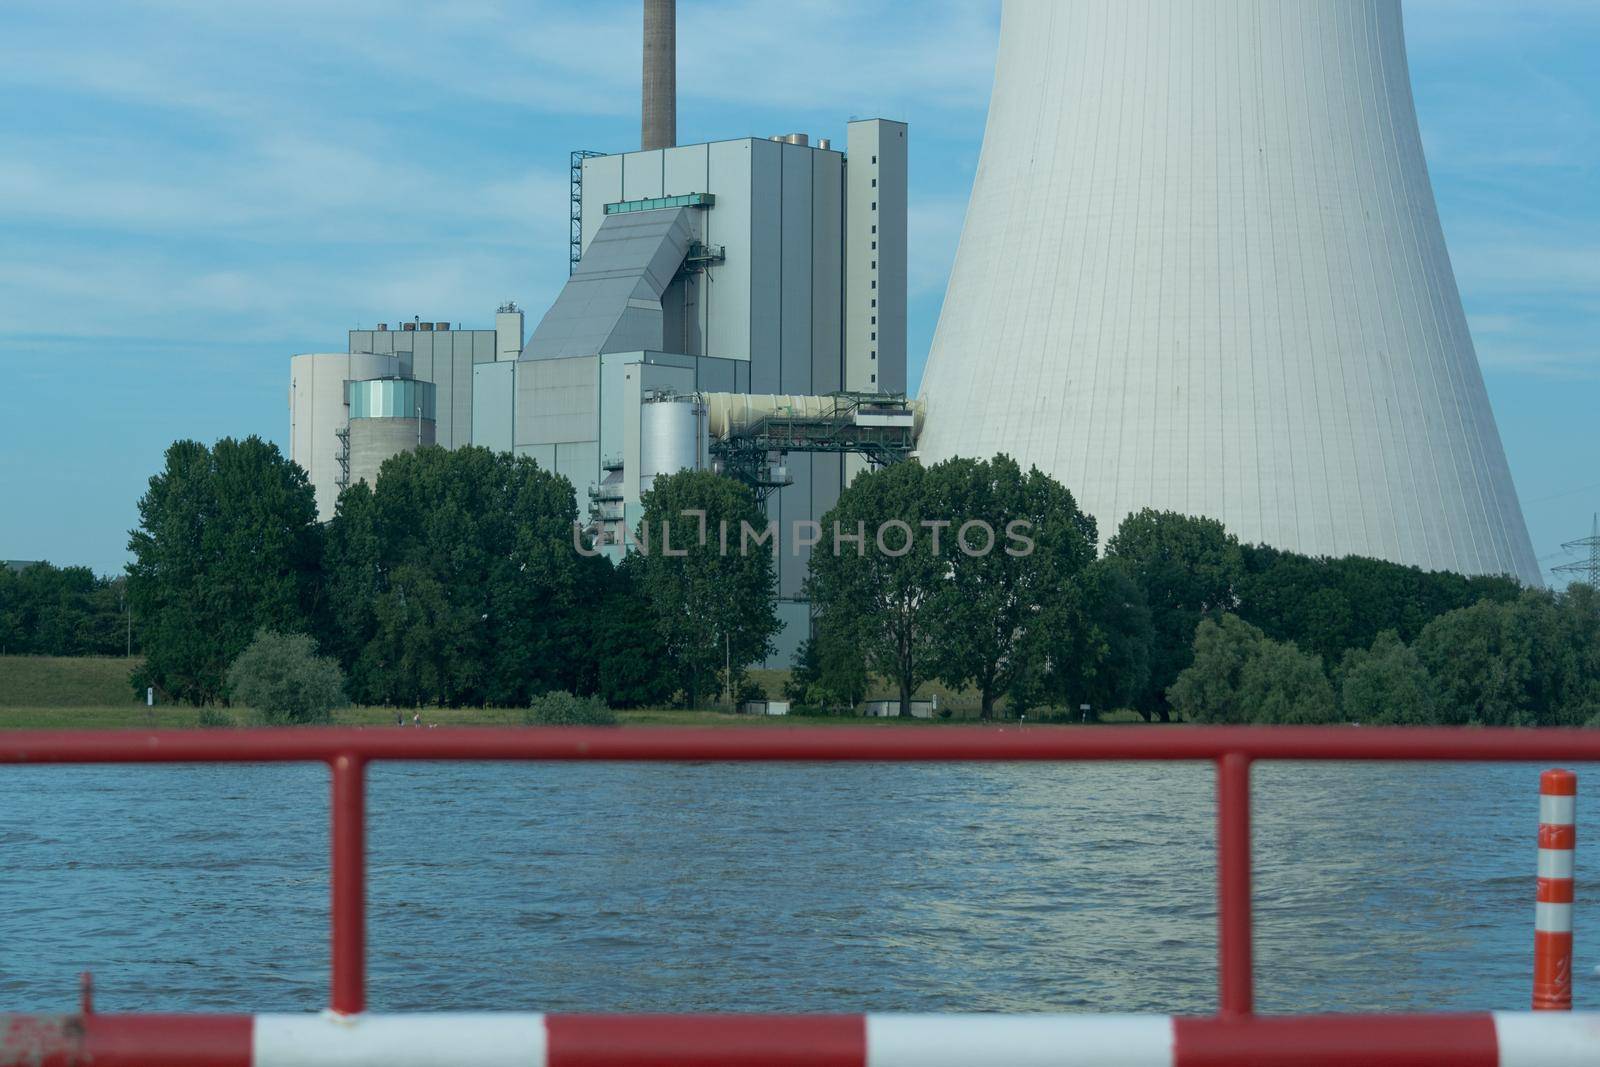 Power plant Walsum in Duisburg-Walsum. The coal-fired power plant is located on the site of the former coal mine Walsum directly on the Rhine.